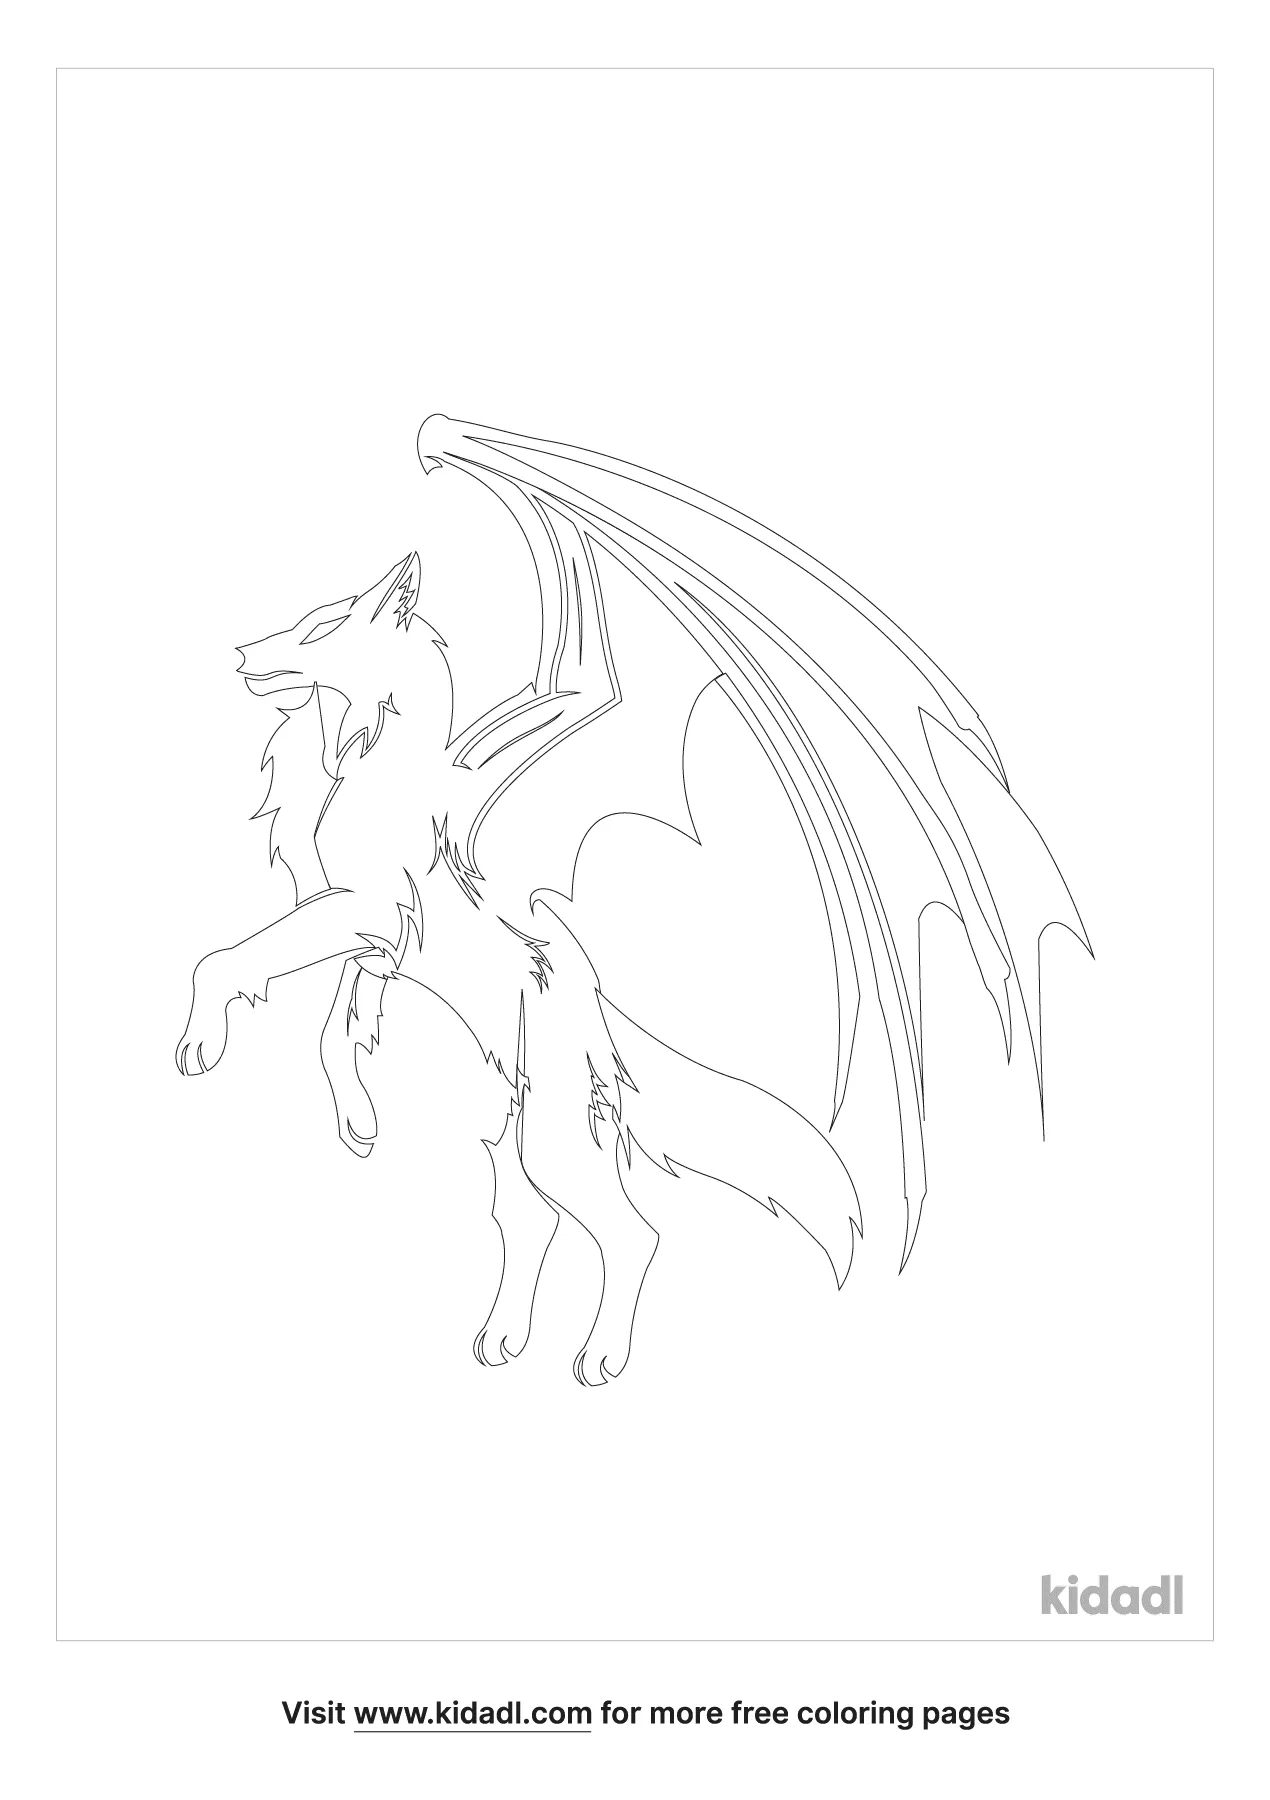 she wolf with wings coloring page free mythology coloring page kidadl